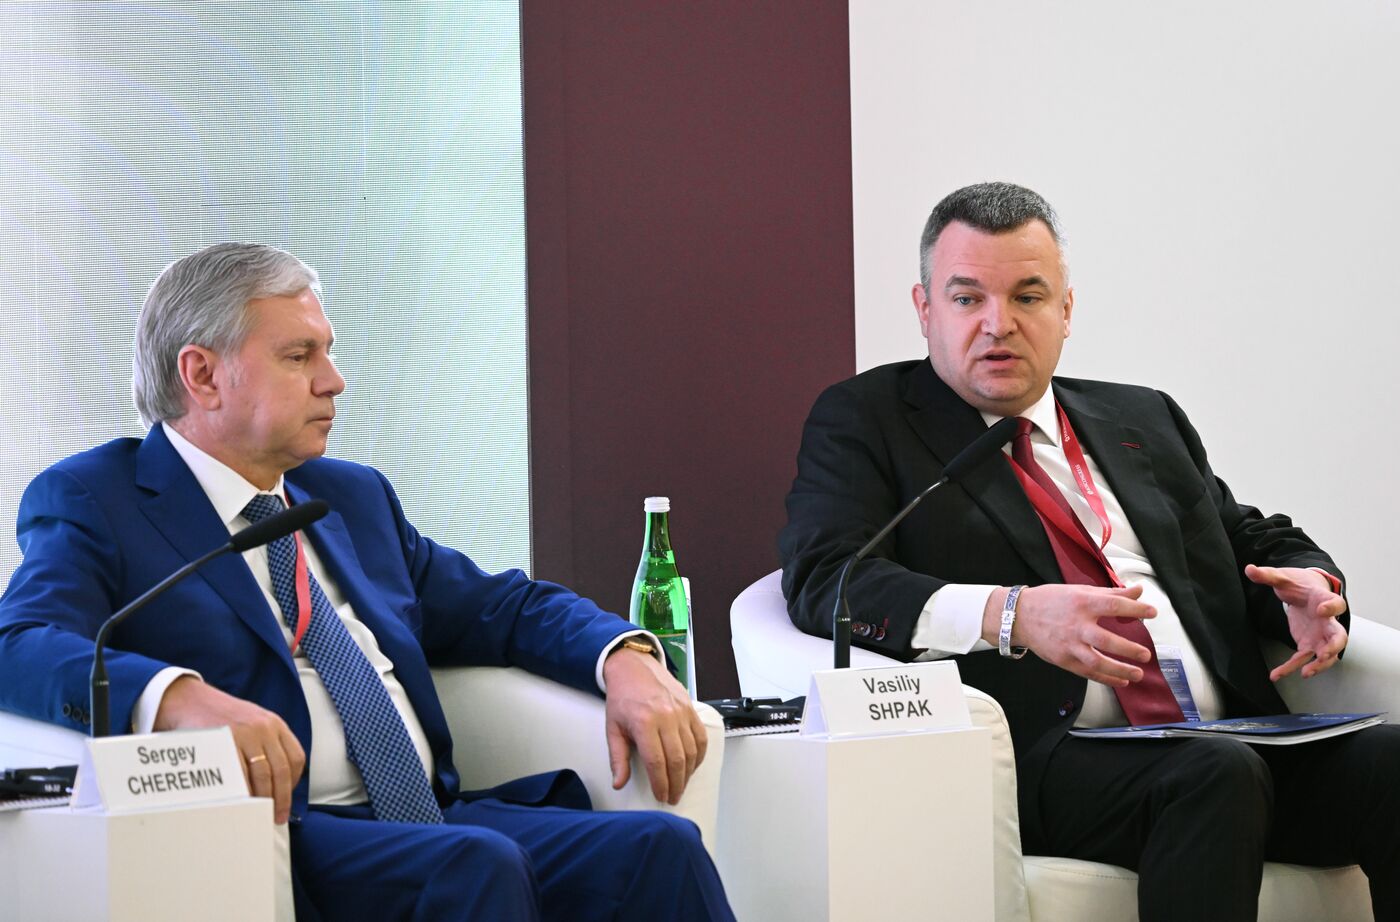 SPIEF-2023. Technological Alliances: The Future of Russian High-Tech Exports